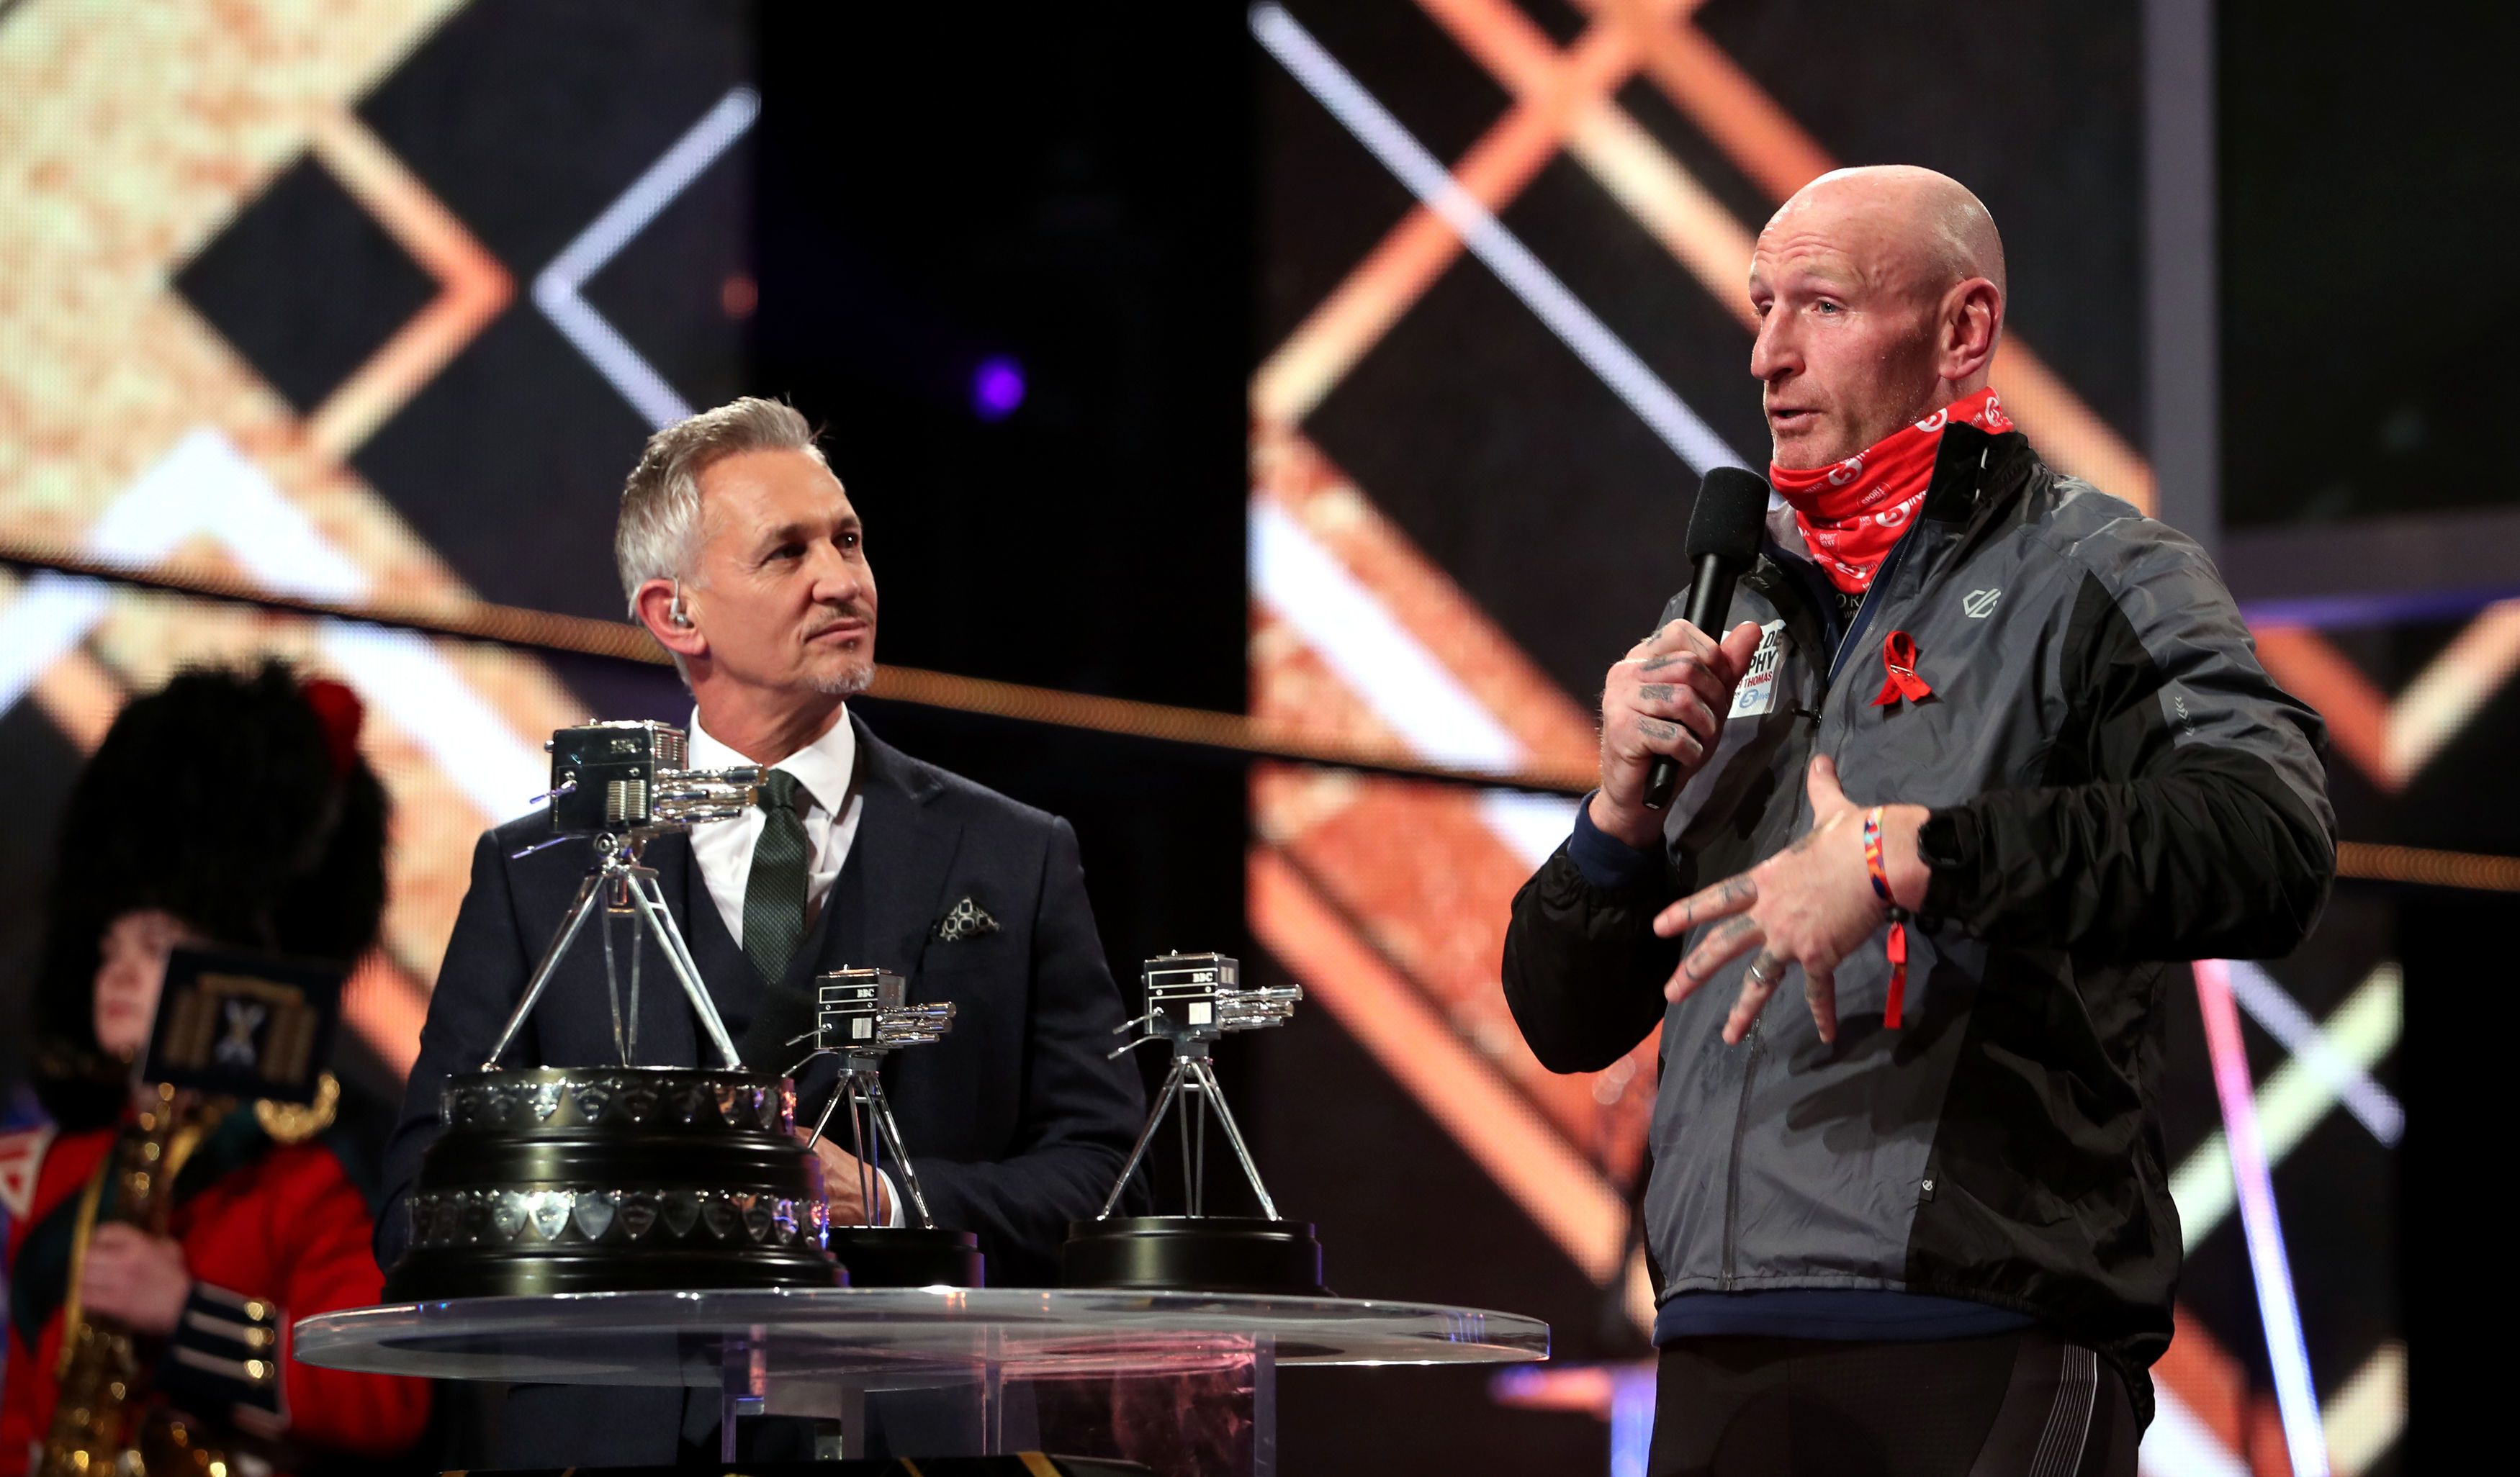 Former rugby player Gareth Thomas brings the Sports Personality of the Year Award to the stage during the BBC Sports Personality of the Year 2019 at the P&J Live, Aberdeen.